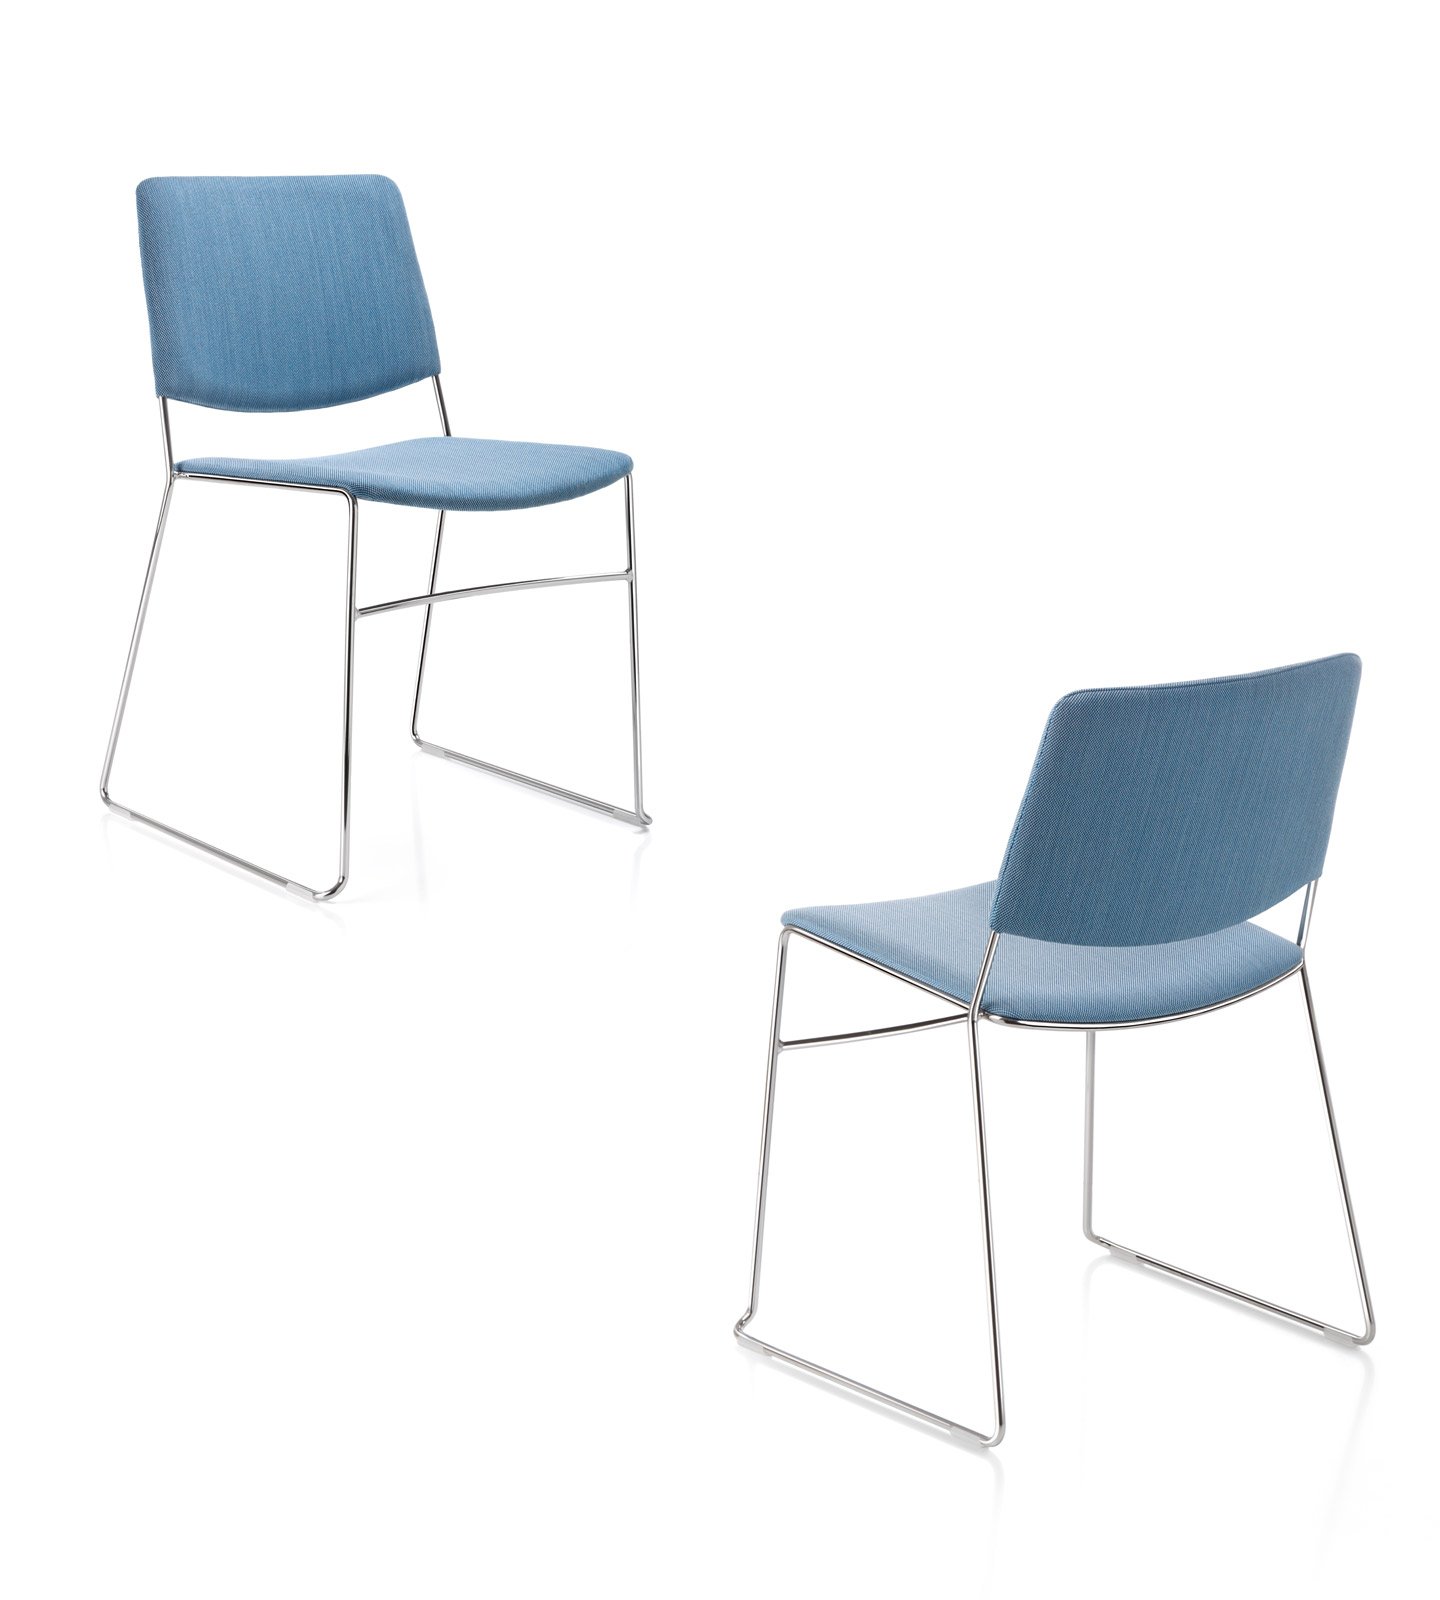 Link F Chair from Fornasarig, designed by Luca Fornasarig